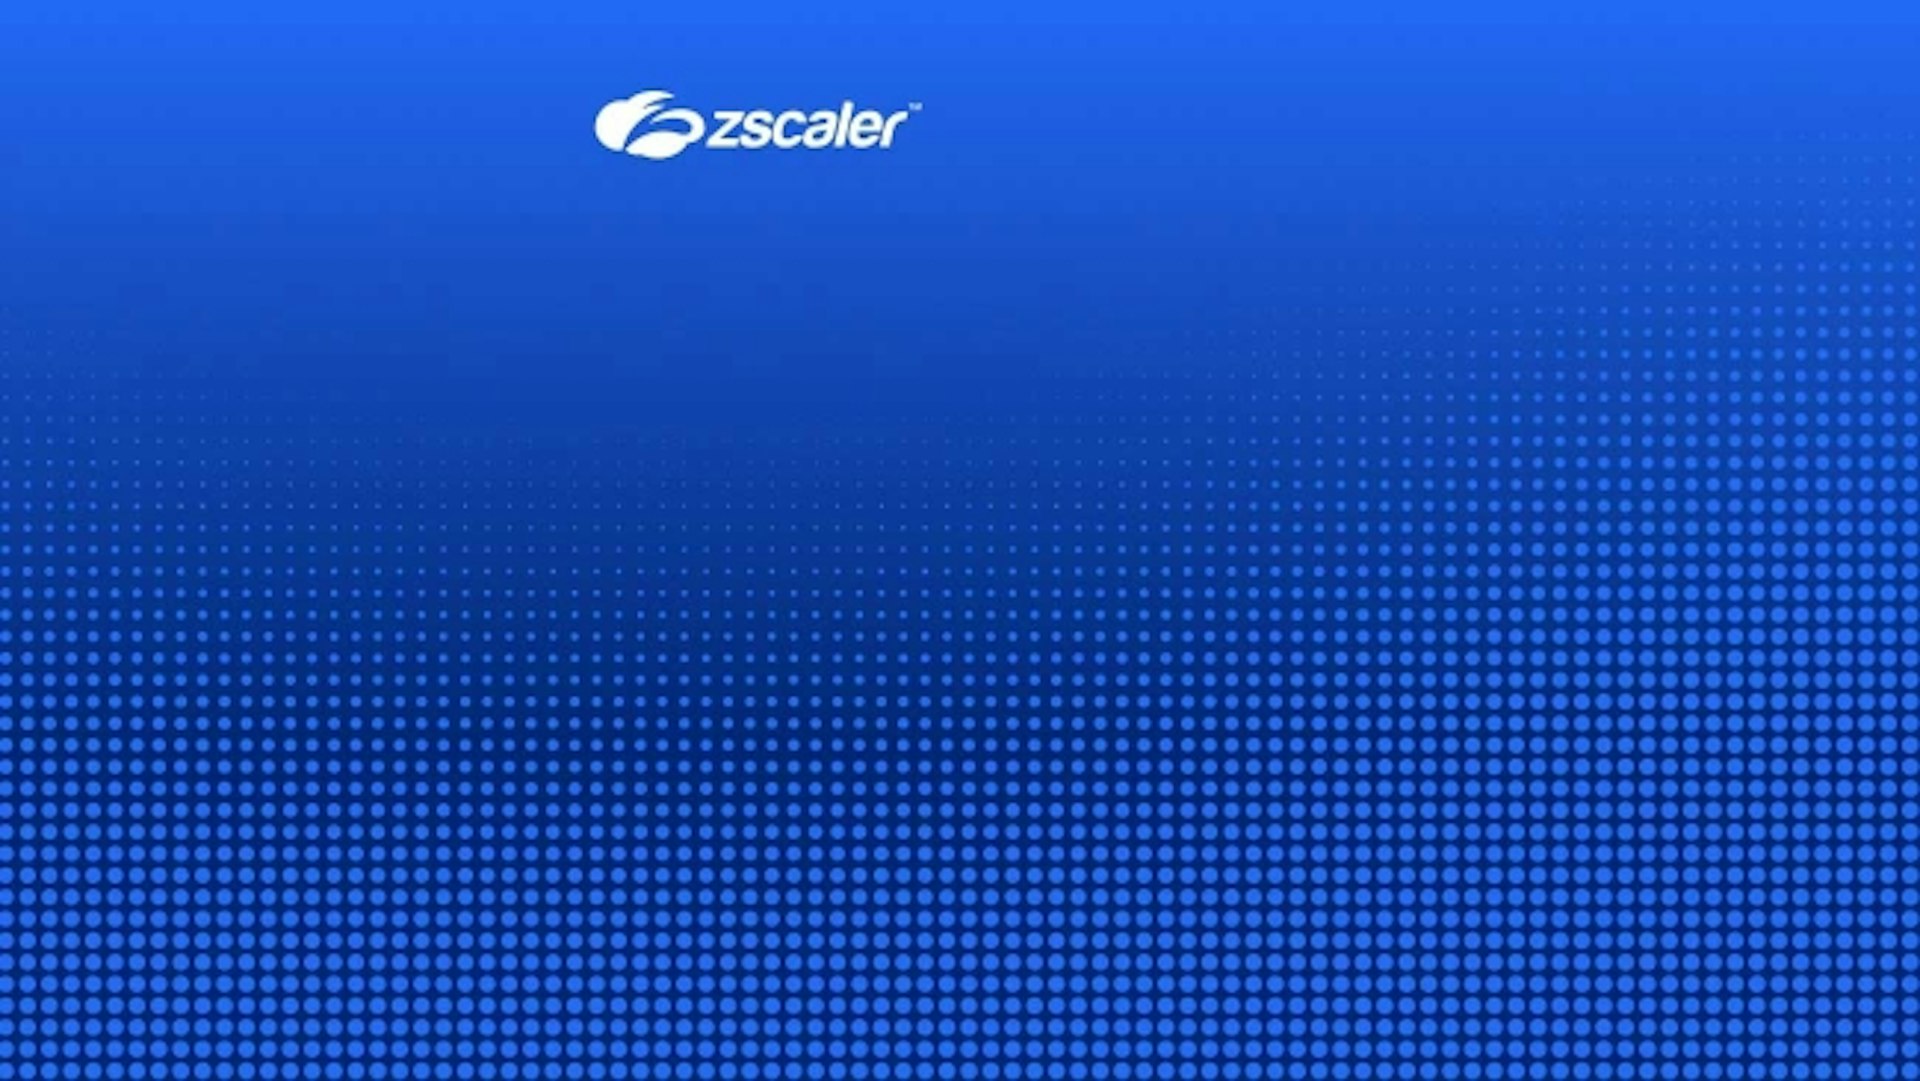 Zscaler Business Insightsの概要